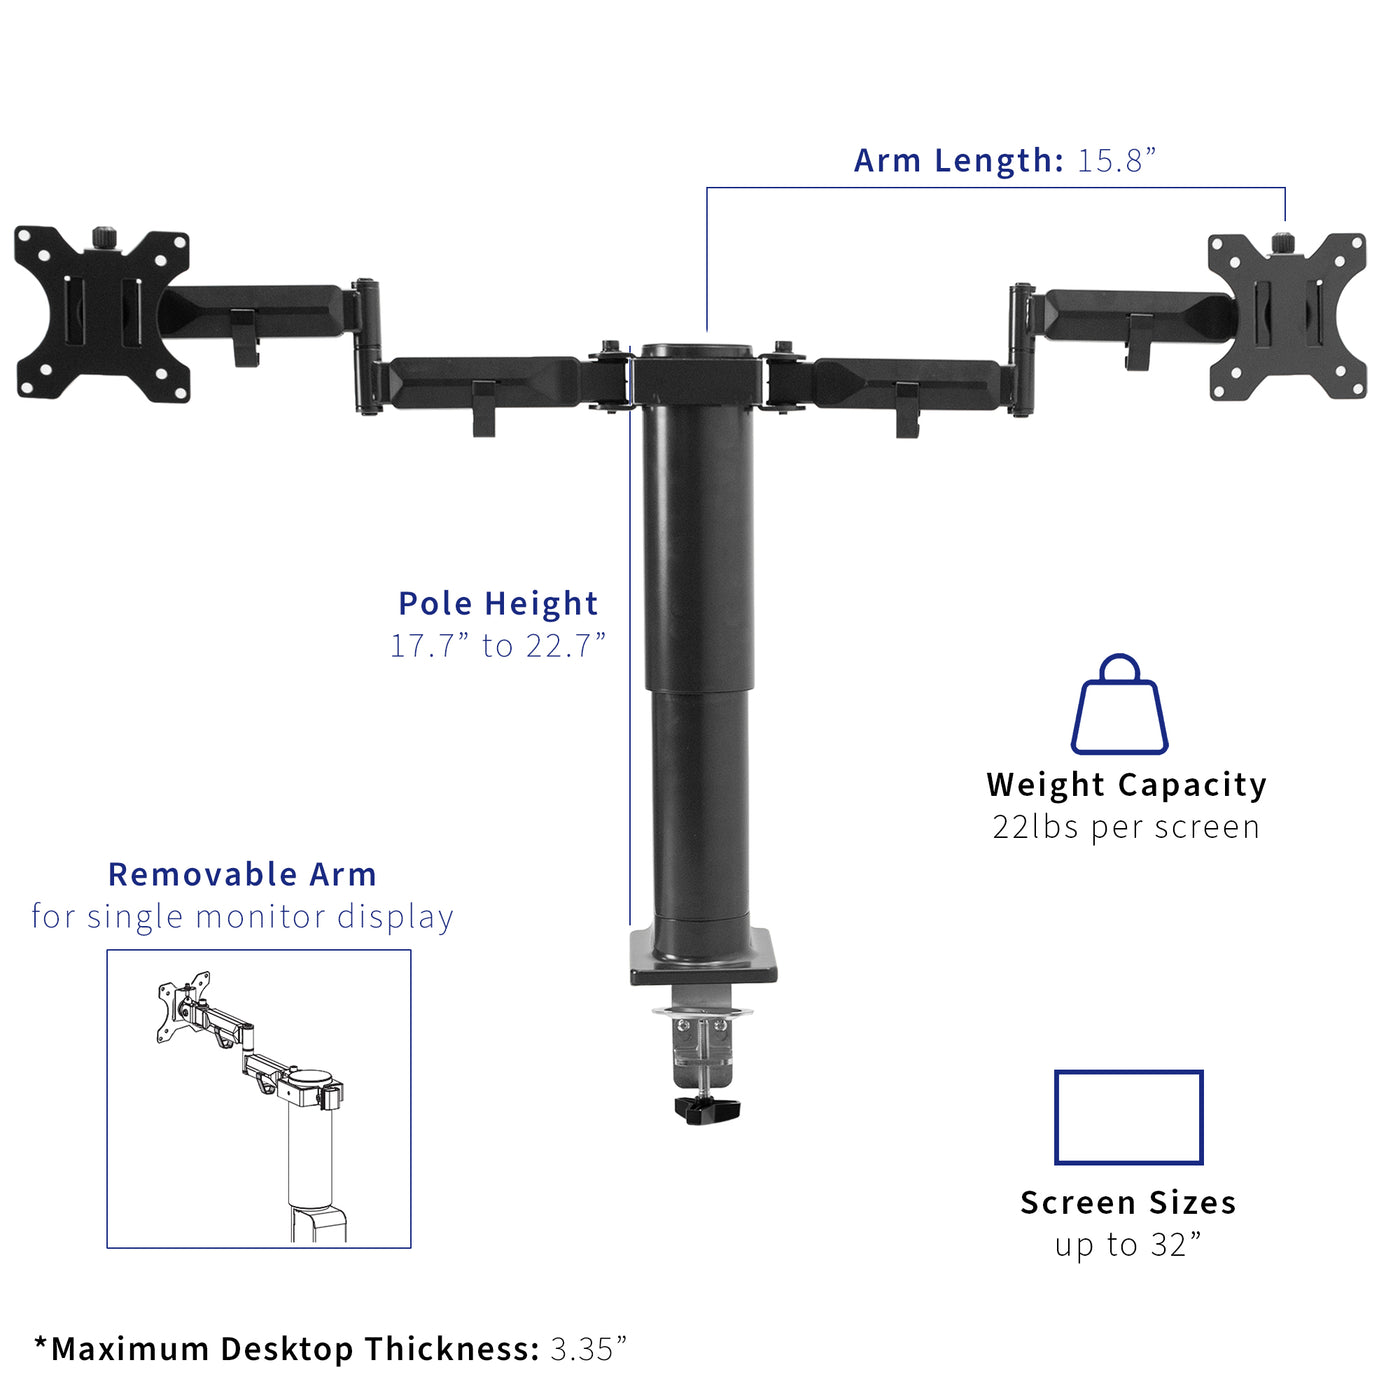 Dual monitor arm length and dimensions. 